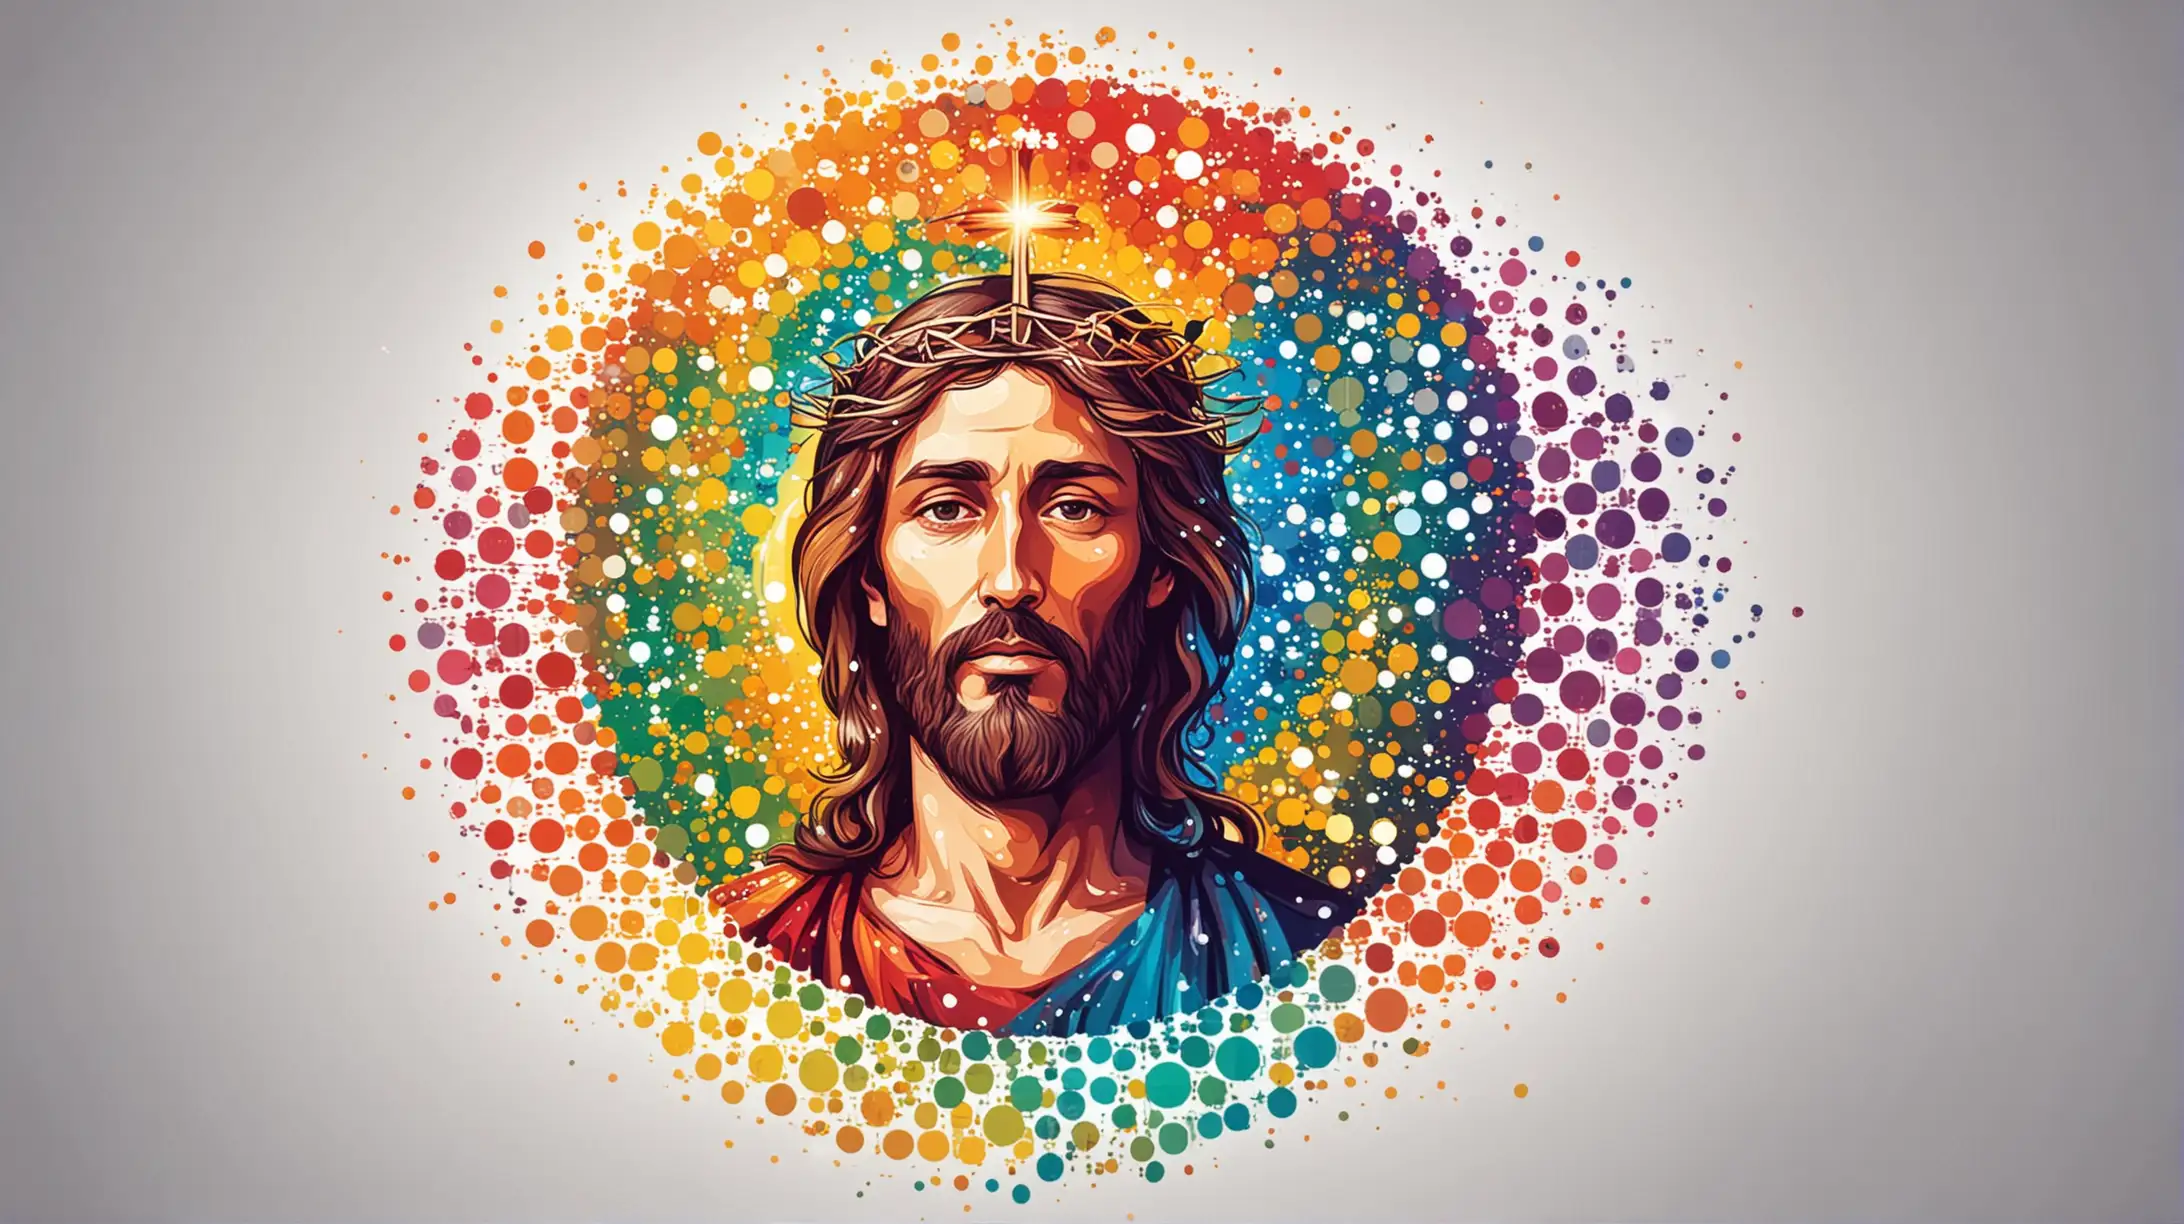 Jesus and Holy Spirit image colourfull round dots vector